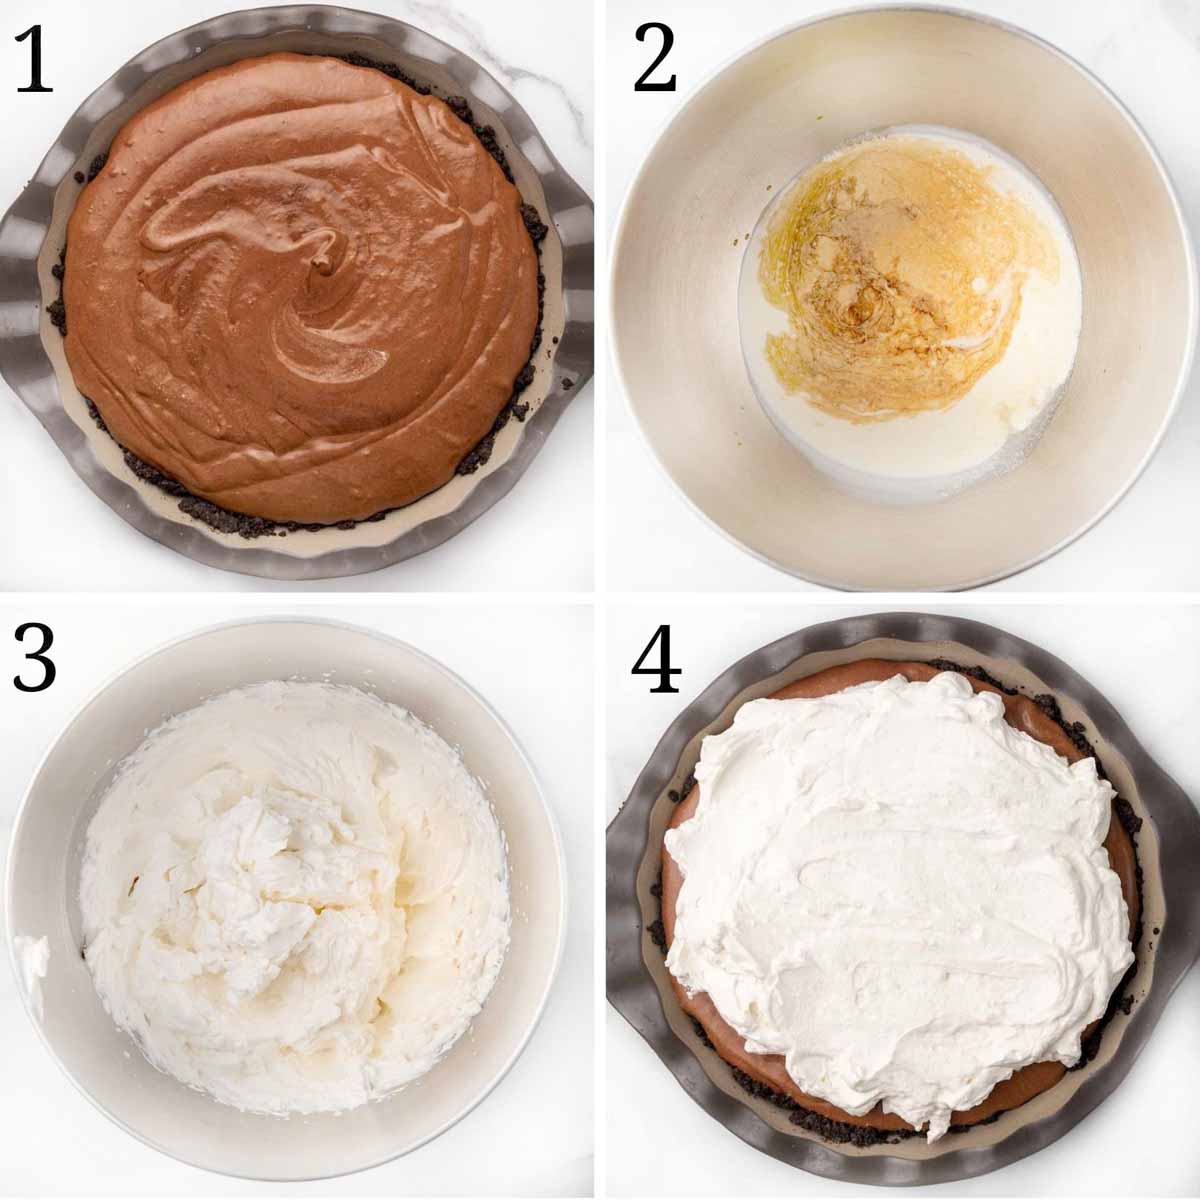 four images showing how to finish making and assemble a french silk pie